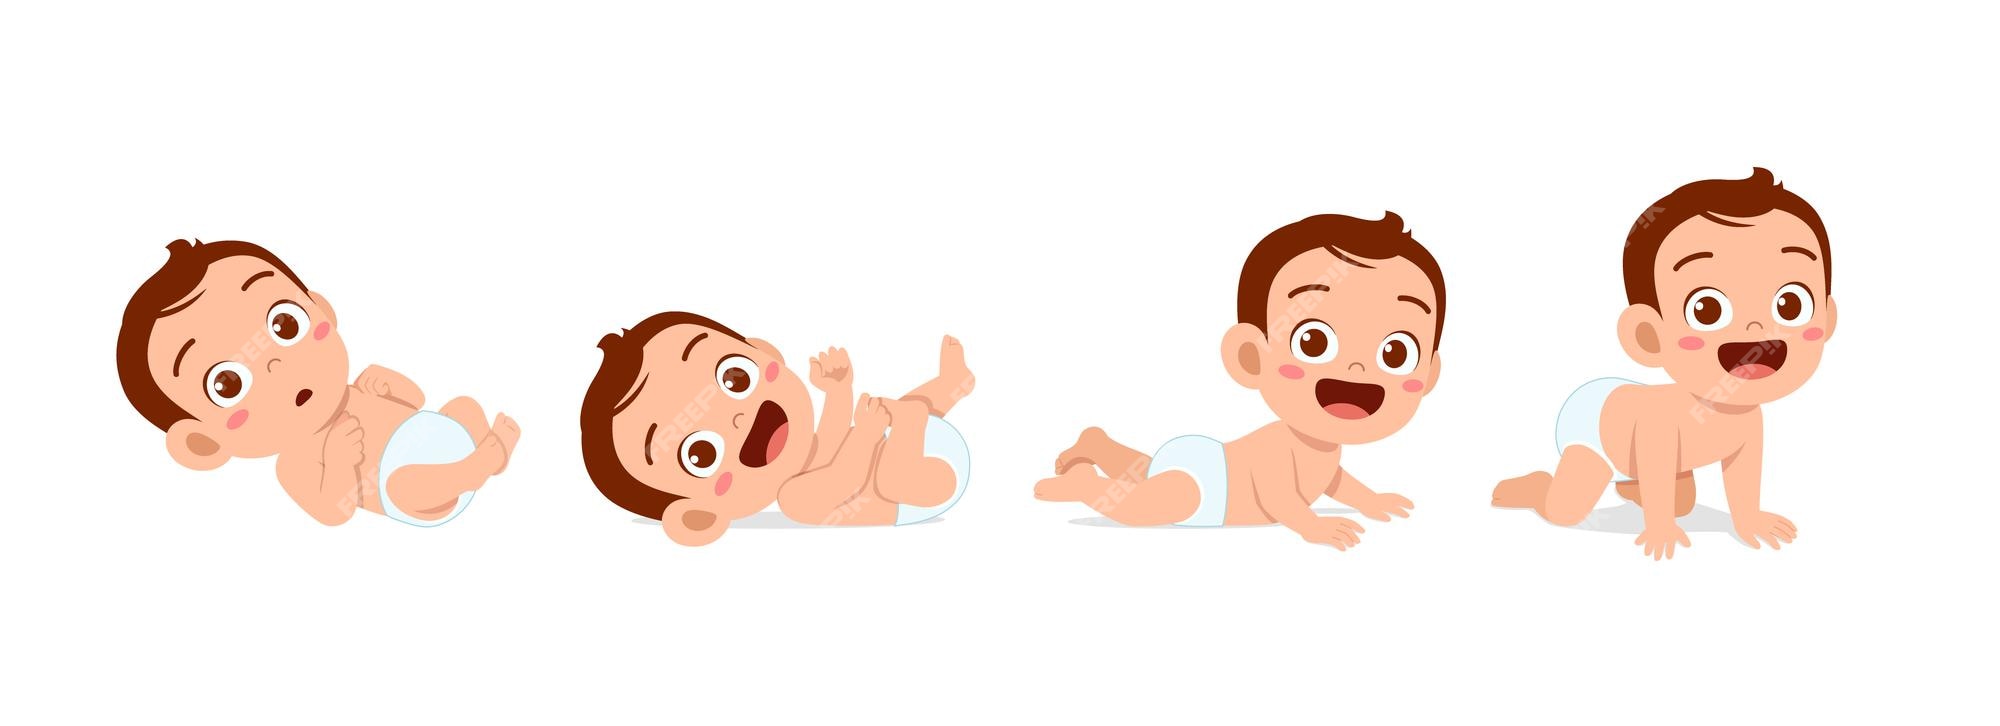 Cute Boy from Kid To Teenager. Stages of Growing Up Stock Vector -  Illustration of baby, cycle: 270221993